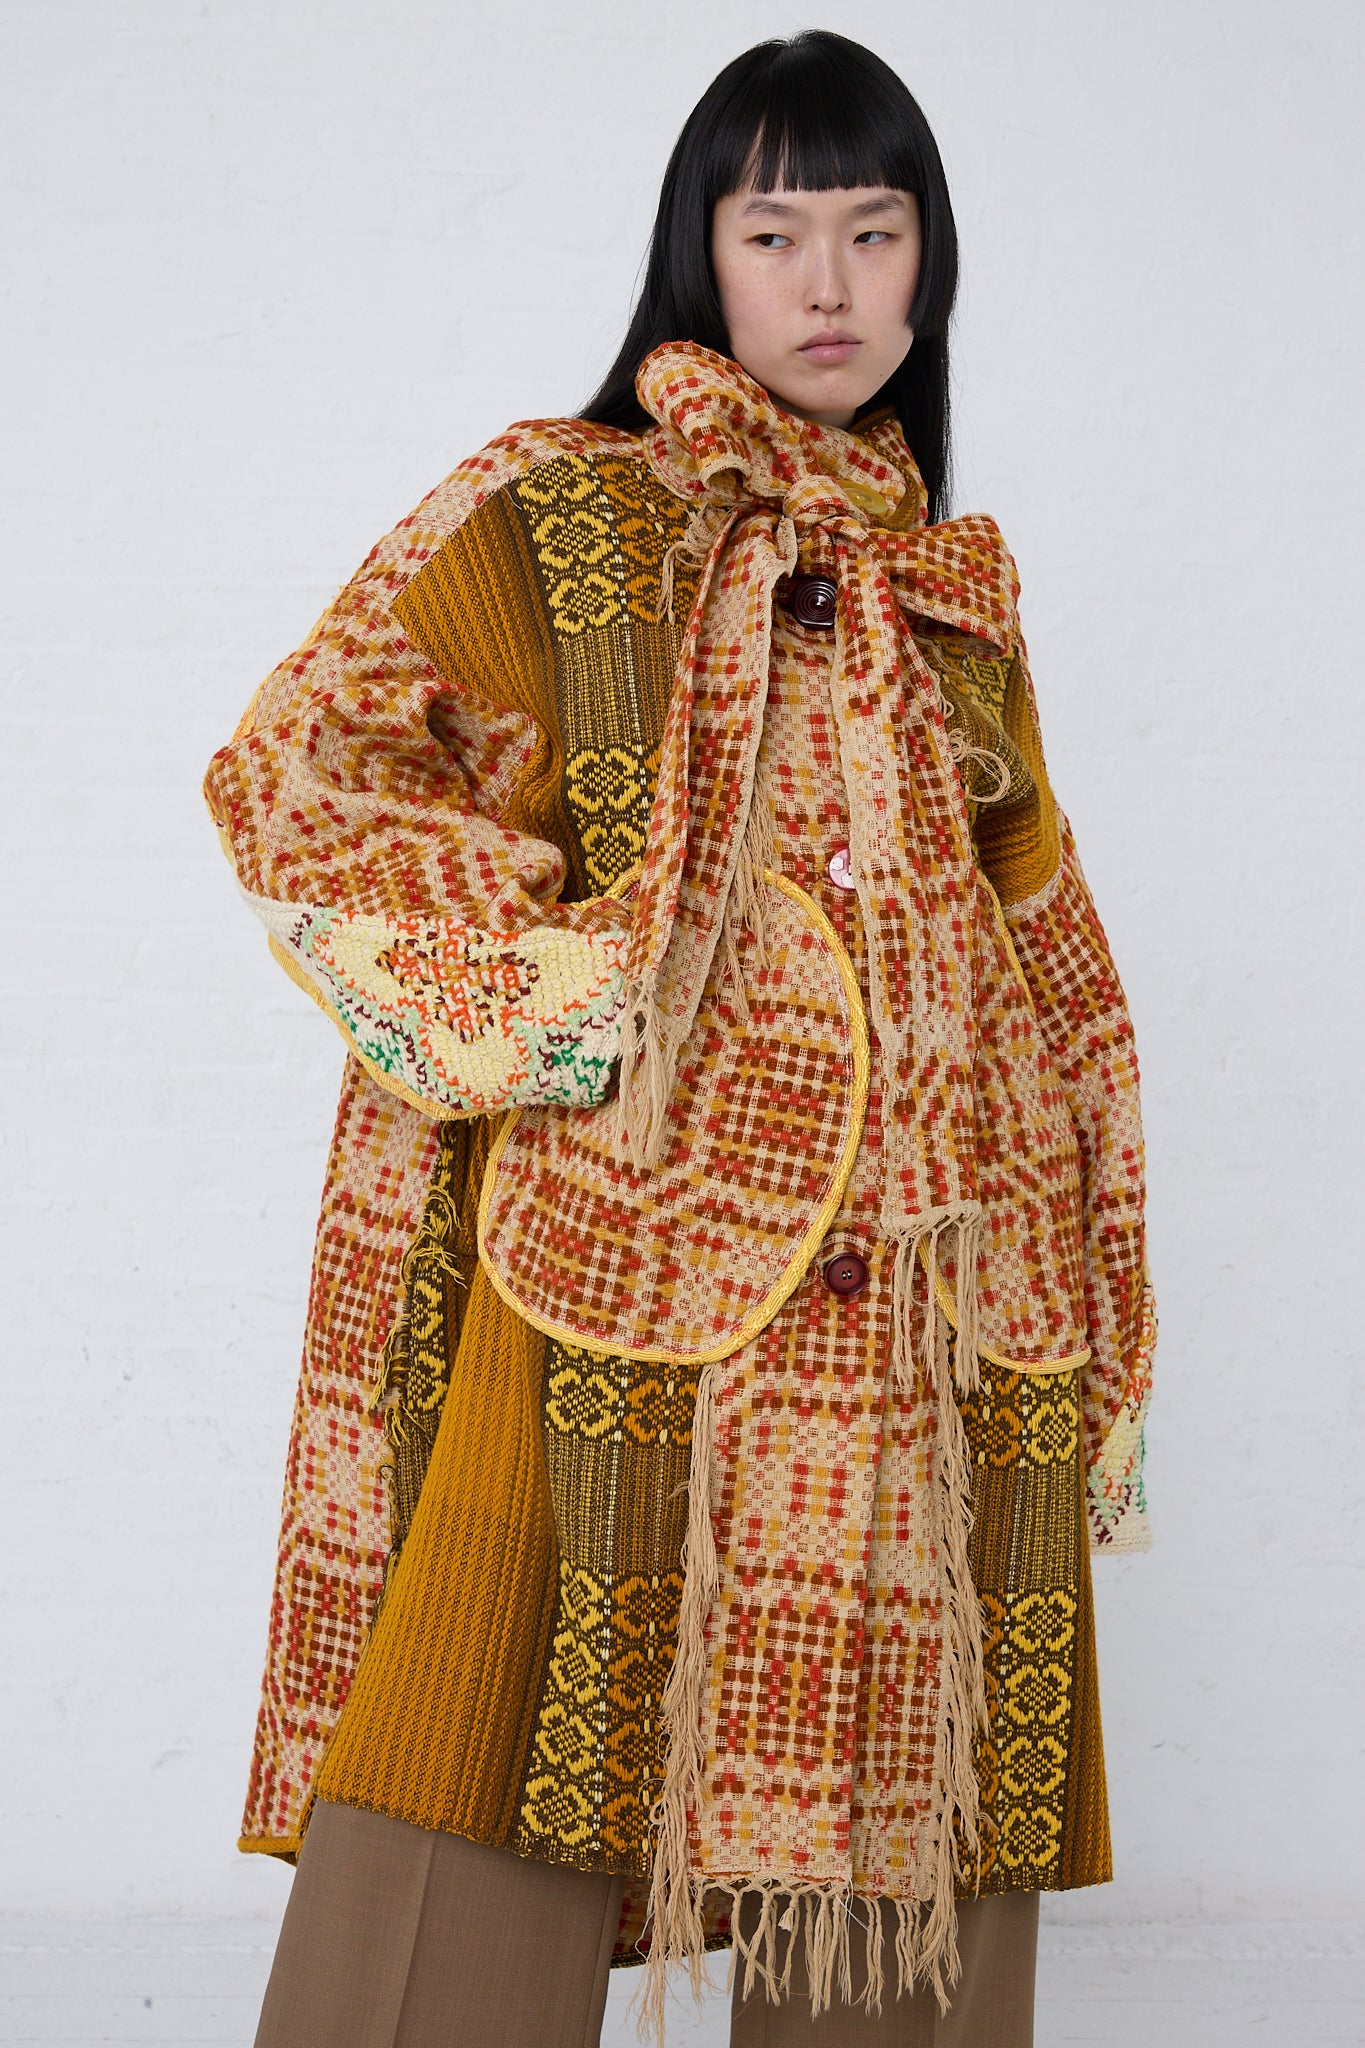 A woman wearing a Thank You Have A Good Day Patchwork Blanket Scarf Parka in Red, Yellow and Brown. Full-length, front view.